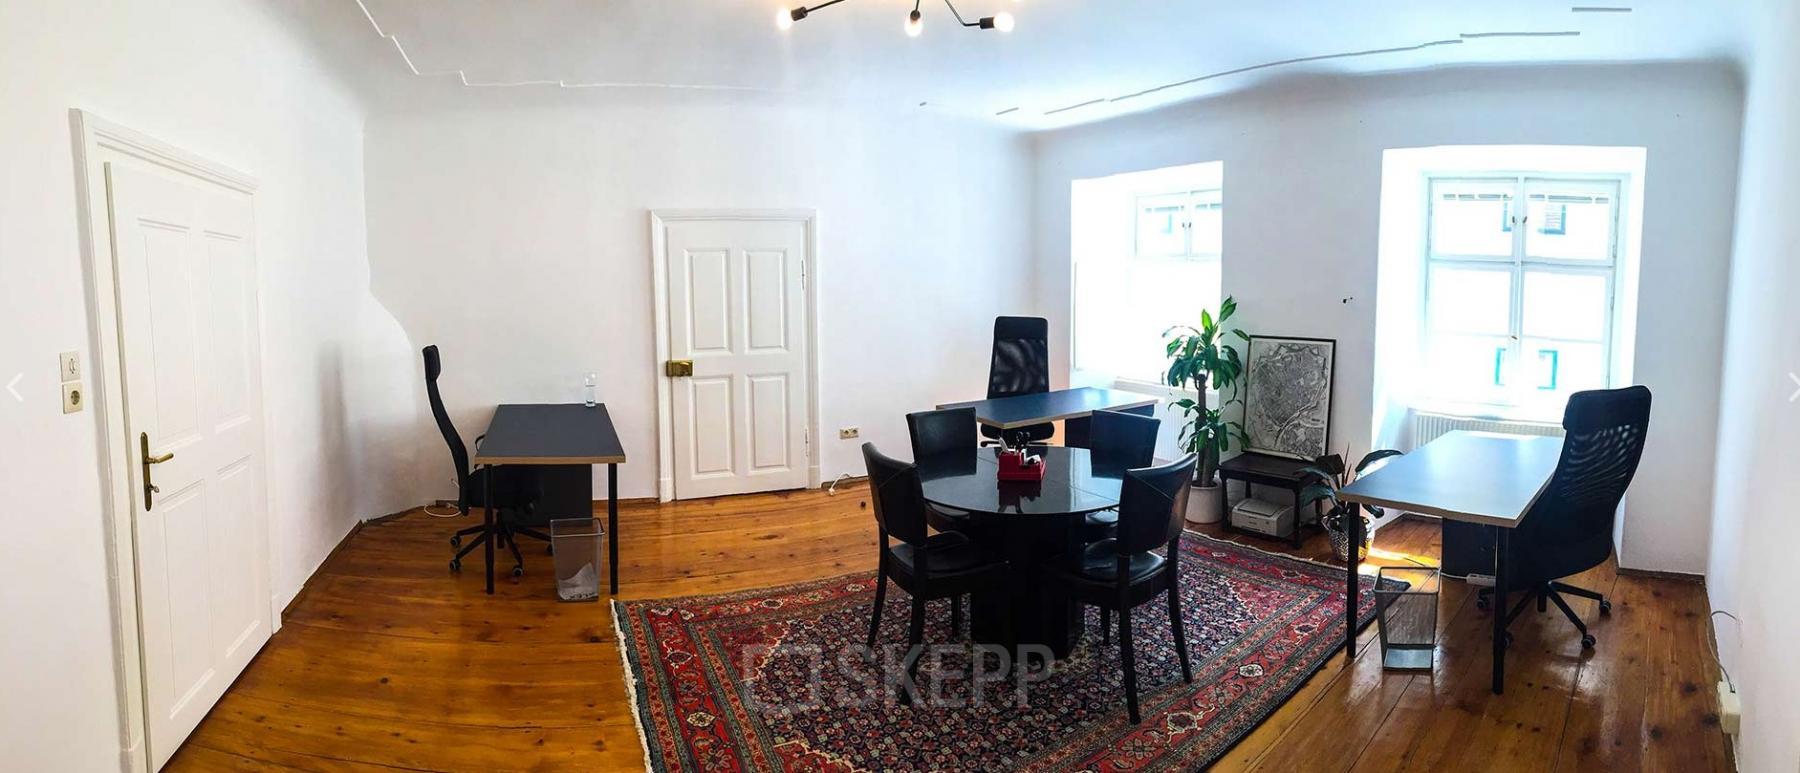 Modern office space for rent in Vienna